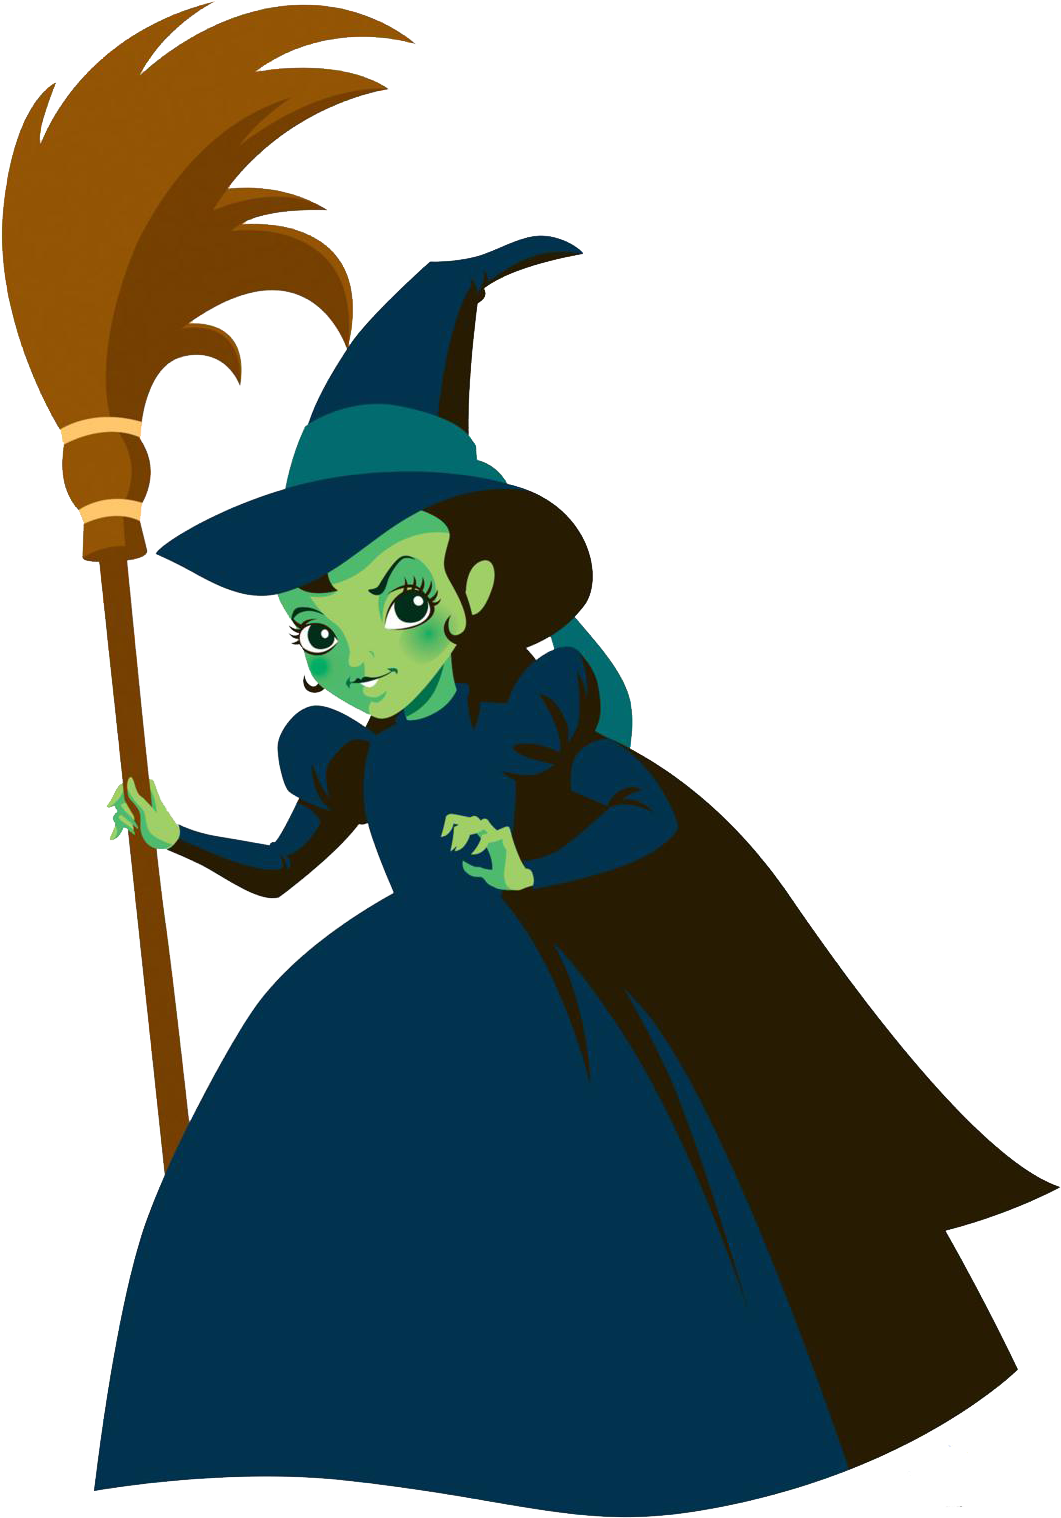 That Wizard Hat Wont Work On Me Your Never Going To - Wicked Witch Of The W...